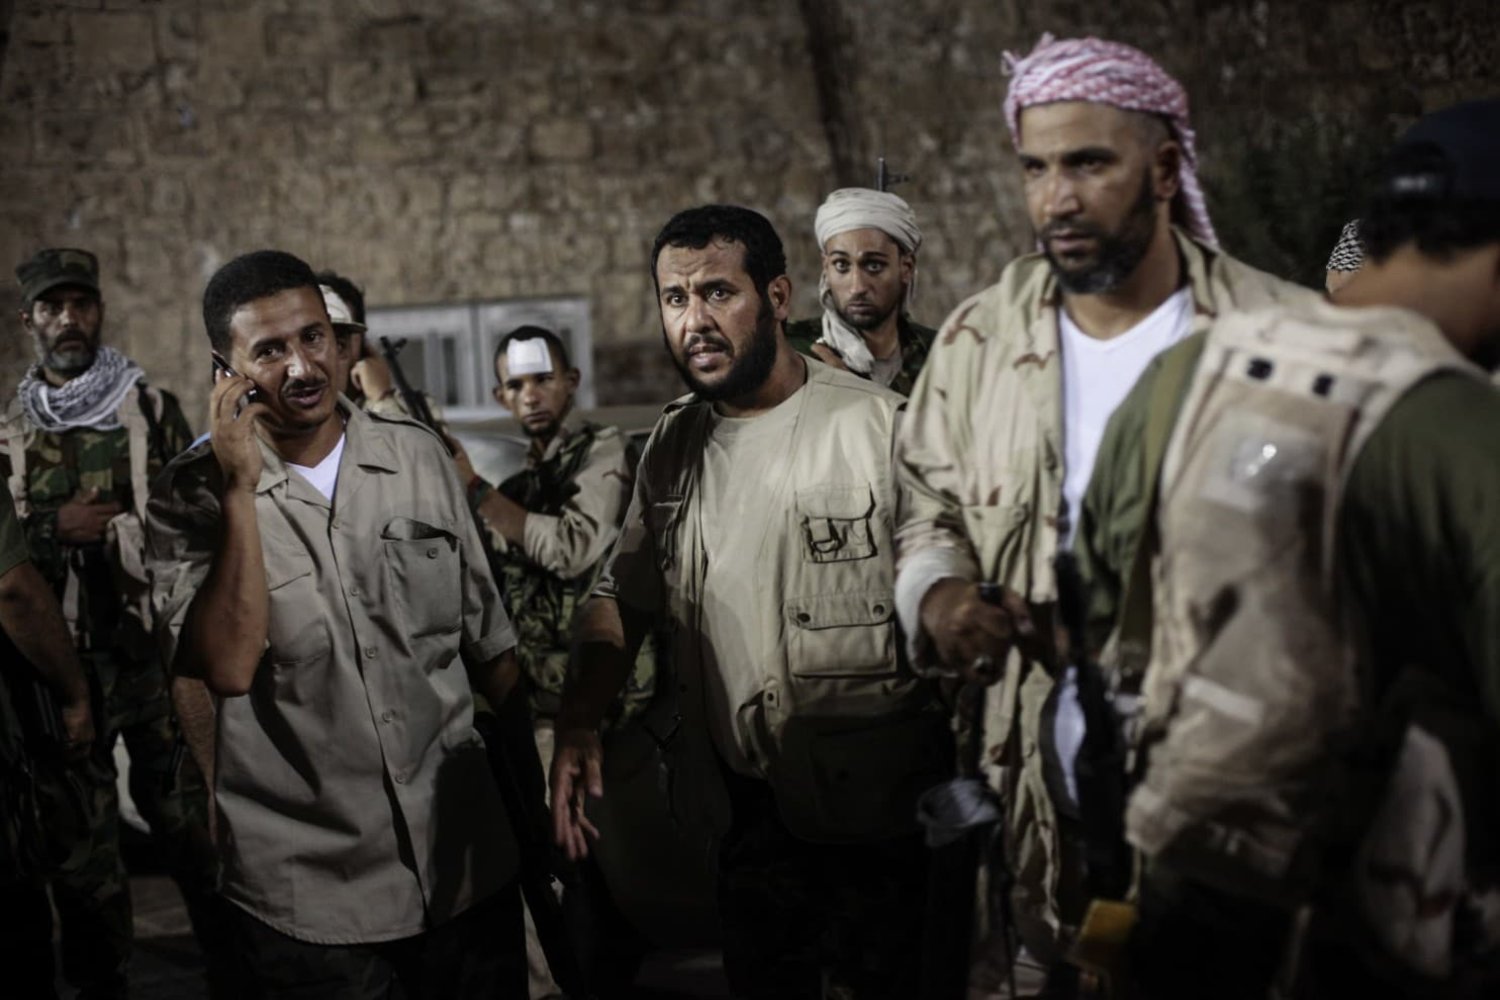 Abdulhakim Belhadj, center, gives instructions to his troops in Tripoli, Libya’s capital, on Aug. 22, 2011. (Etienne De Malglaive/Getty Images) 